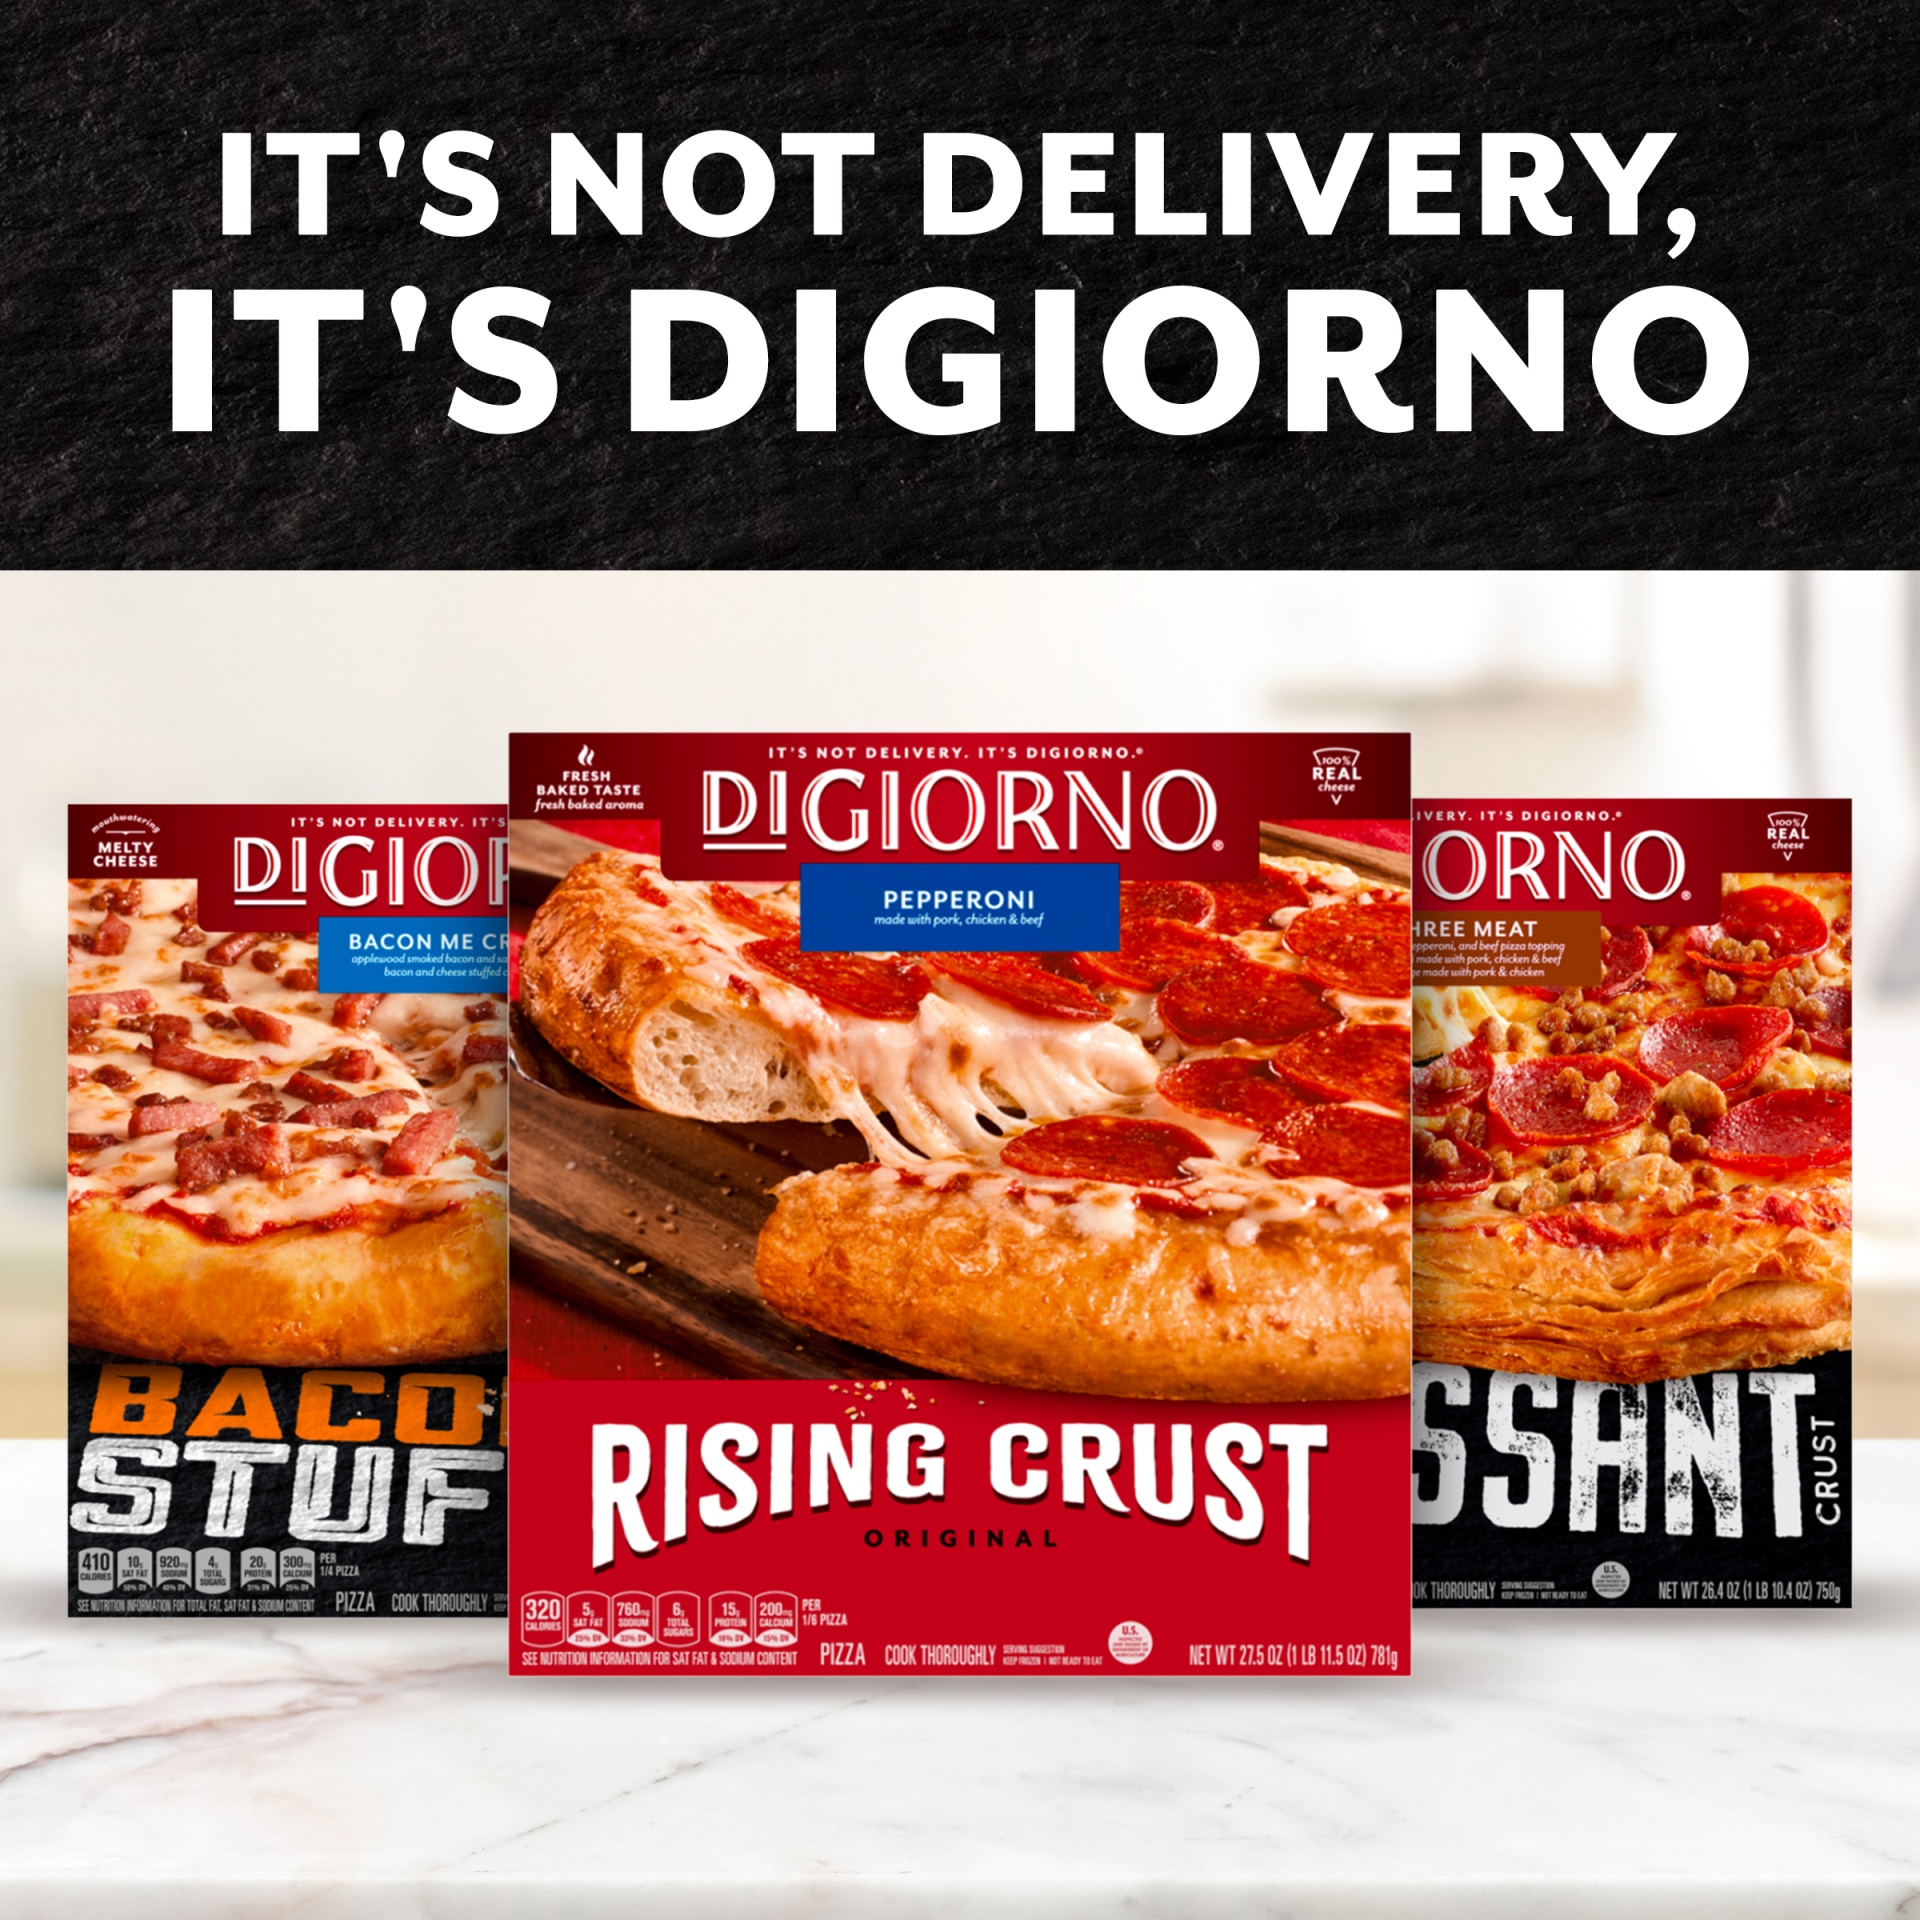 slide 6 of 6, DIGIORNO Three Meat Frozen Pizza on a Hand-Tossed Style Crust, 20.5 oz